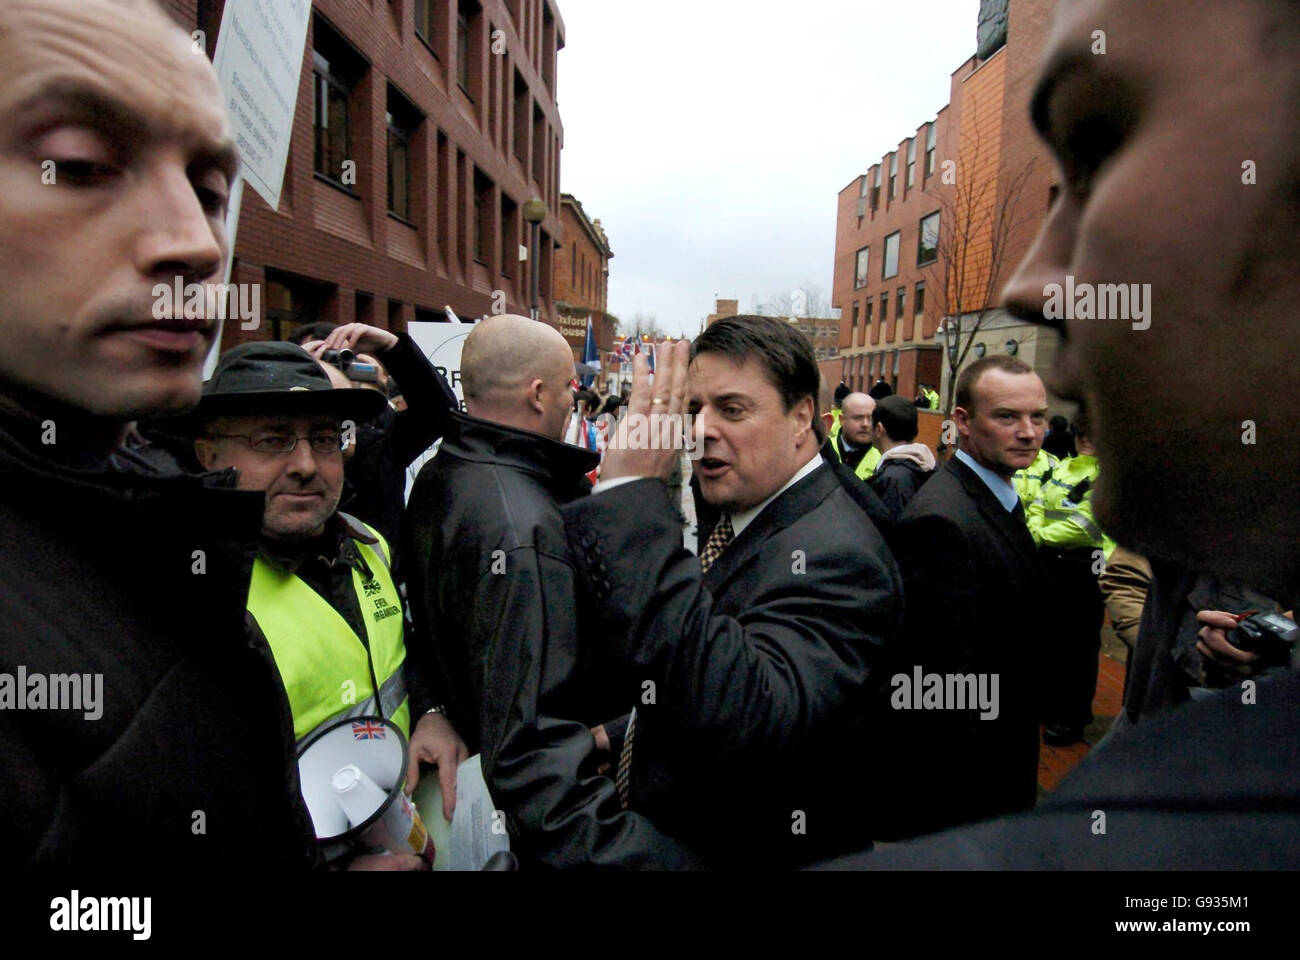 BNP Party Leader Nick Griffin with his supporters at Leeds Crown Court, Monday January 16, 2006, where he is due to go on trial on race-hate charges arising out of an undercover documentary about the party. Mr Griffin was charged following a police investigation stemming from the broadcast of the BBC Secret Agent programme, which featured a number of BNP activists. See PA story COURTS BNP. PRESS ASSOCIATION photo. Photo credit should read: John Giles/PA. Stock Photo